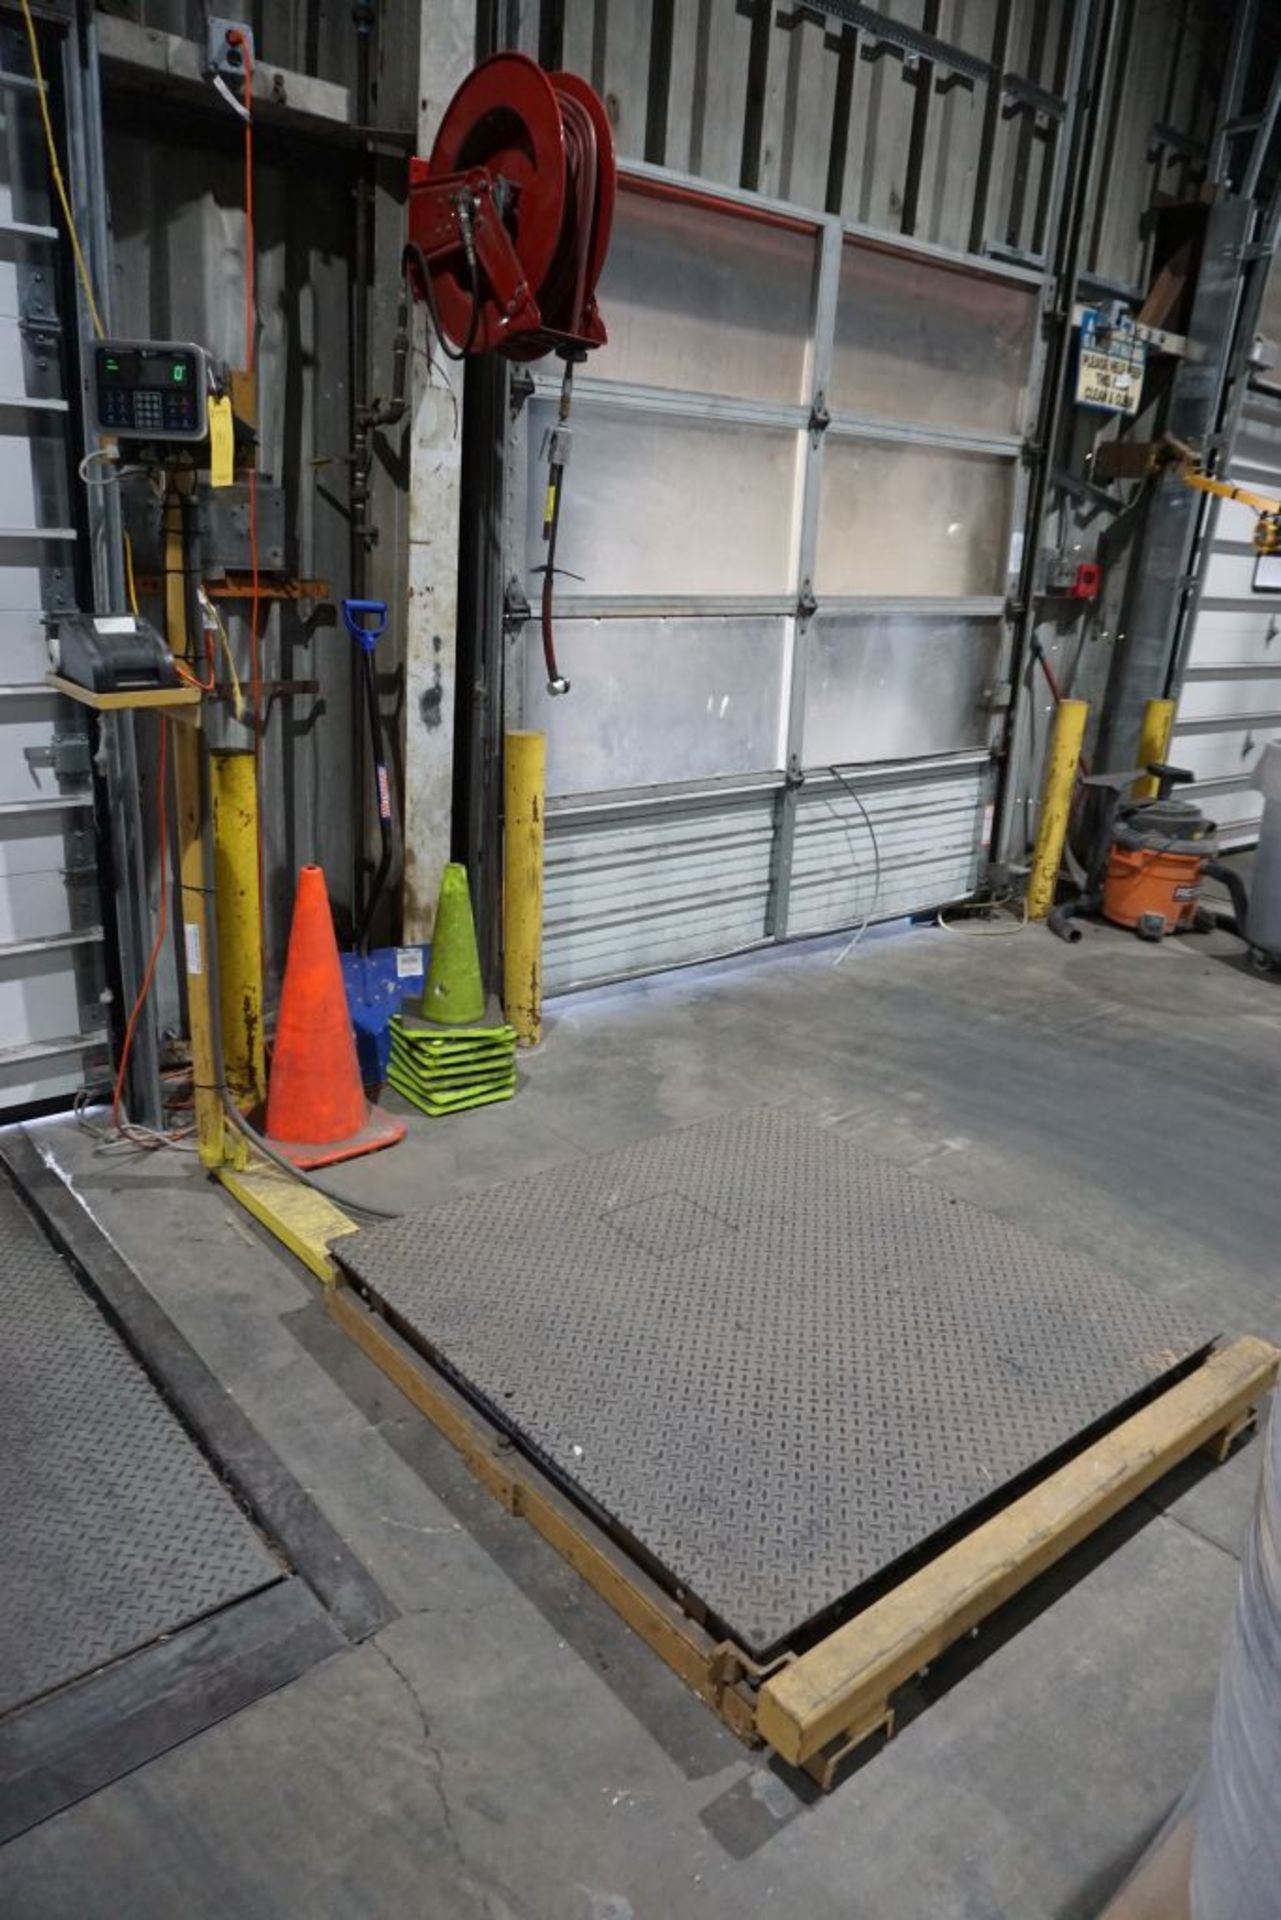 Loadmaster Platform Scale w/Avery Weigh-Tronix Indicator - DELAYED REMOVAL: March 26 | Includes